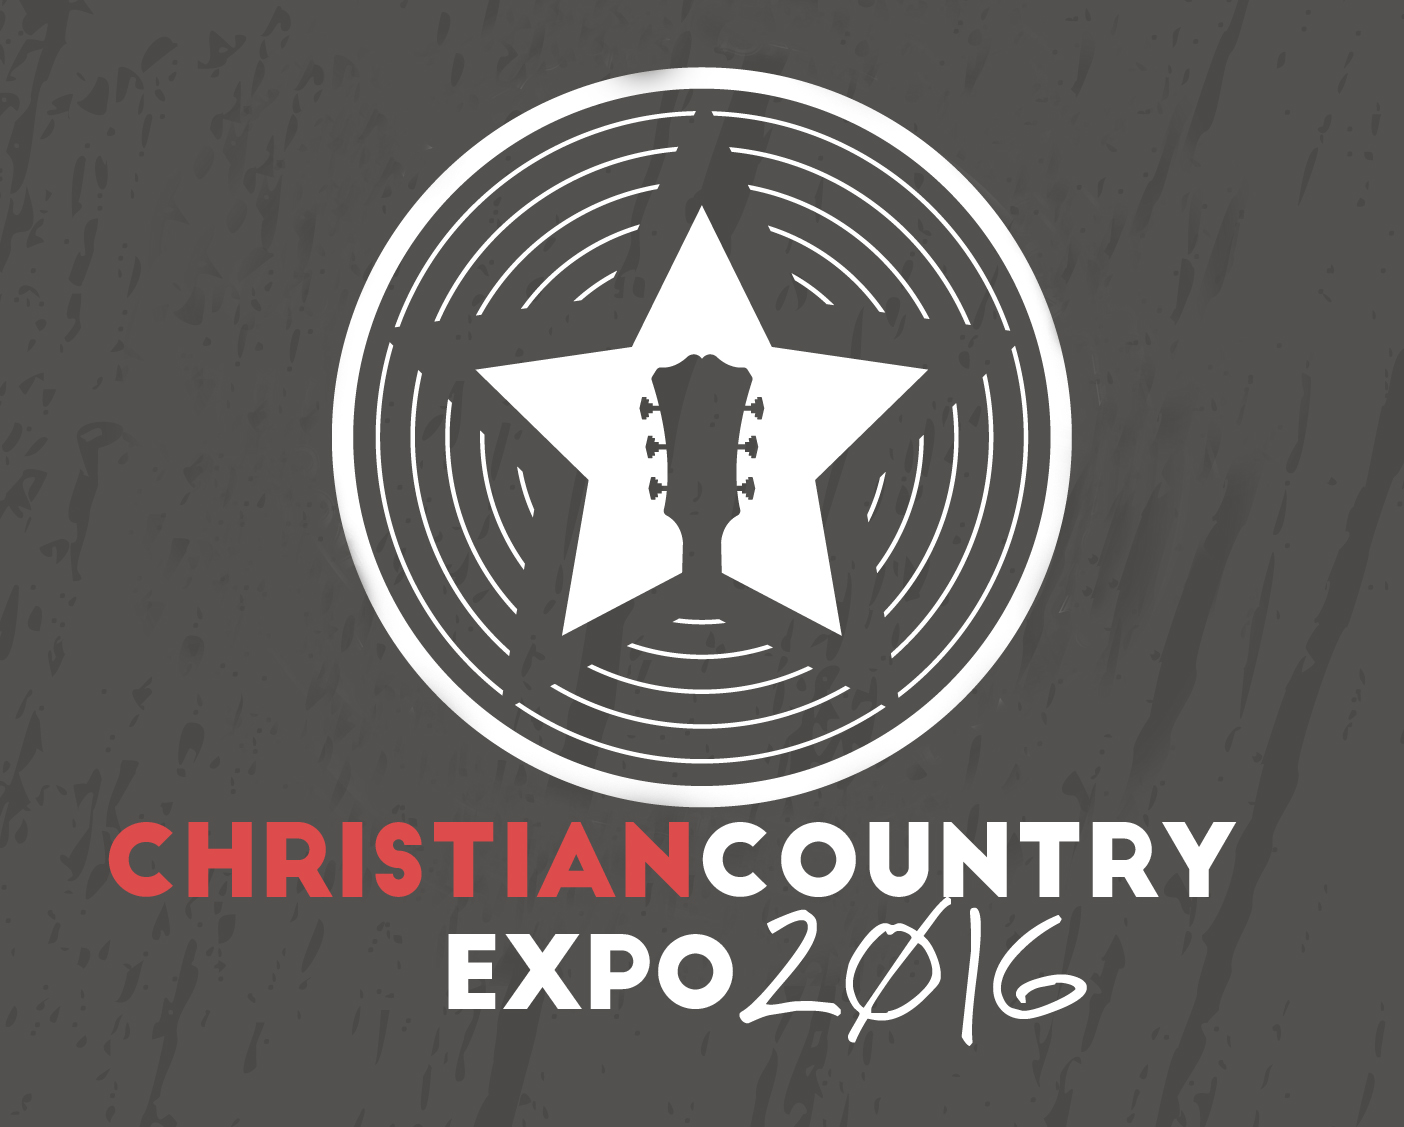 Christian Country Expo 